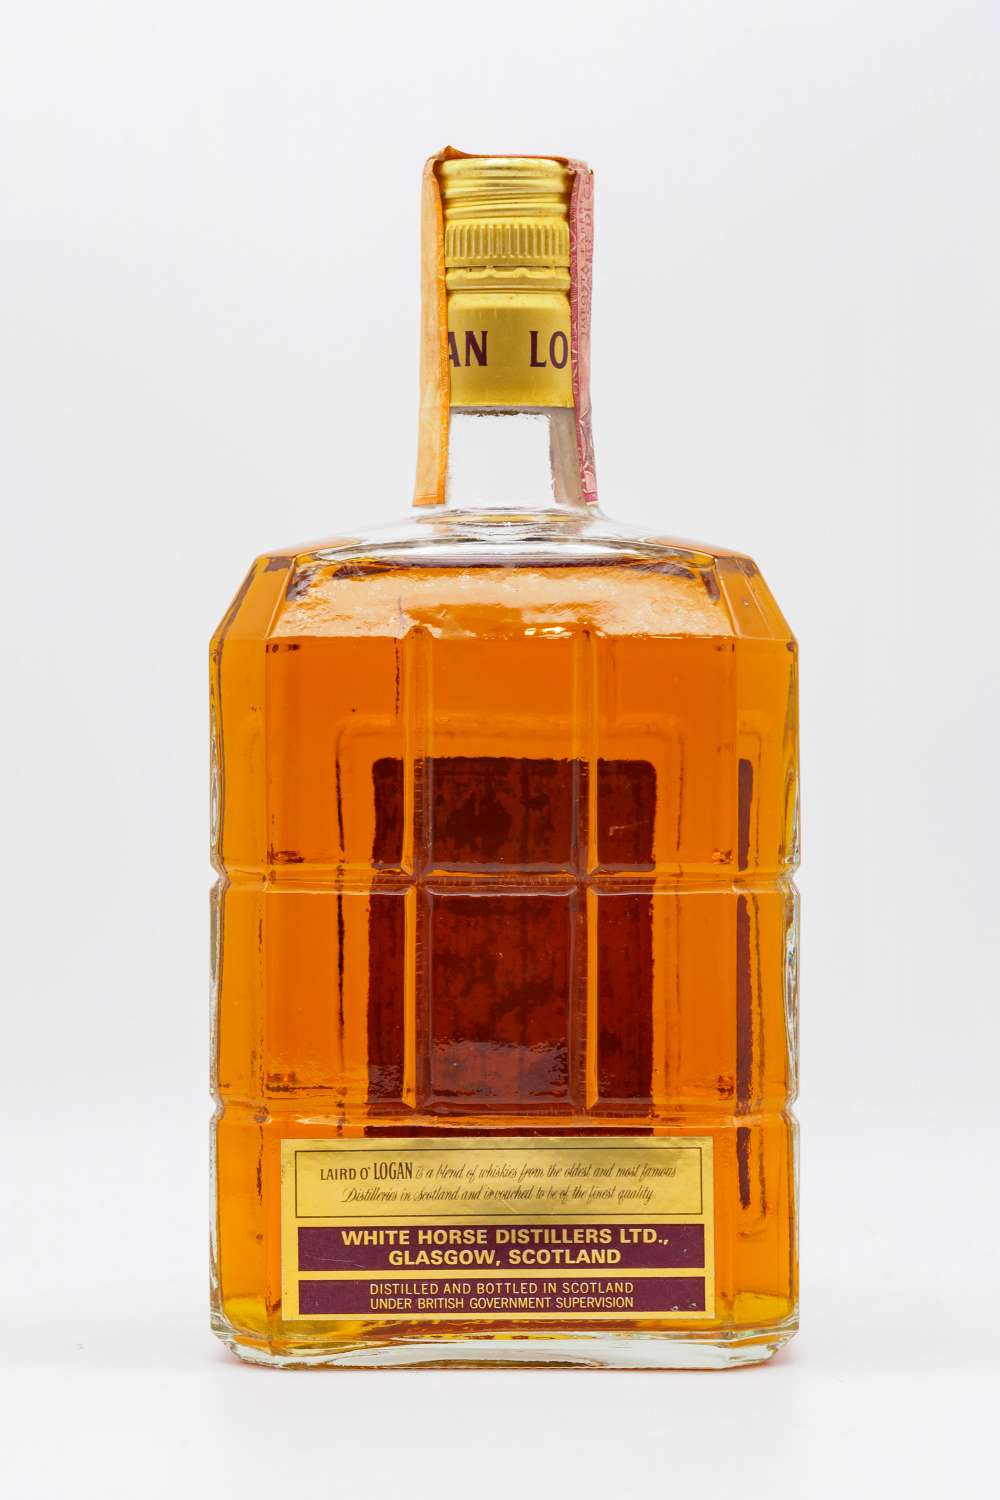 Whisky Network - LOGAN 12 YEARS OLD LAIRD O' DE LUXE SCOTCH WHISKY